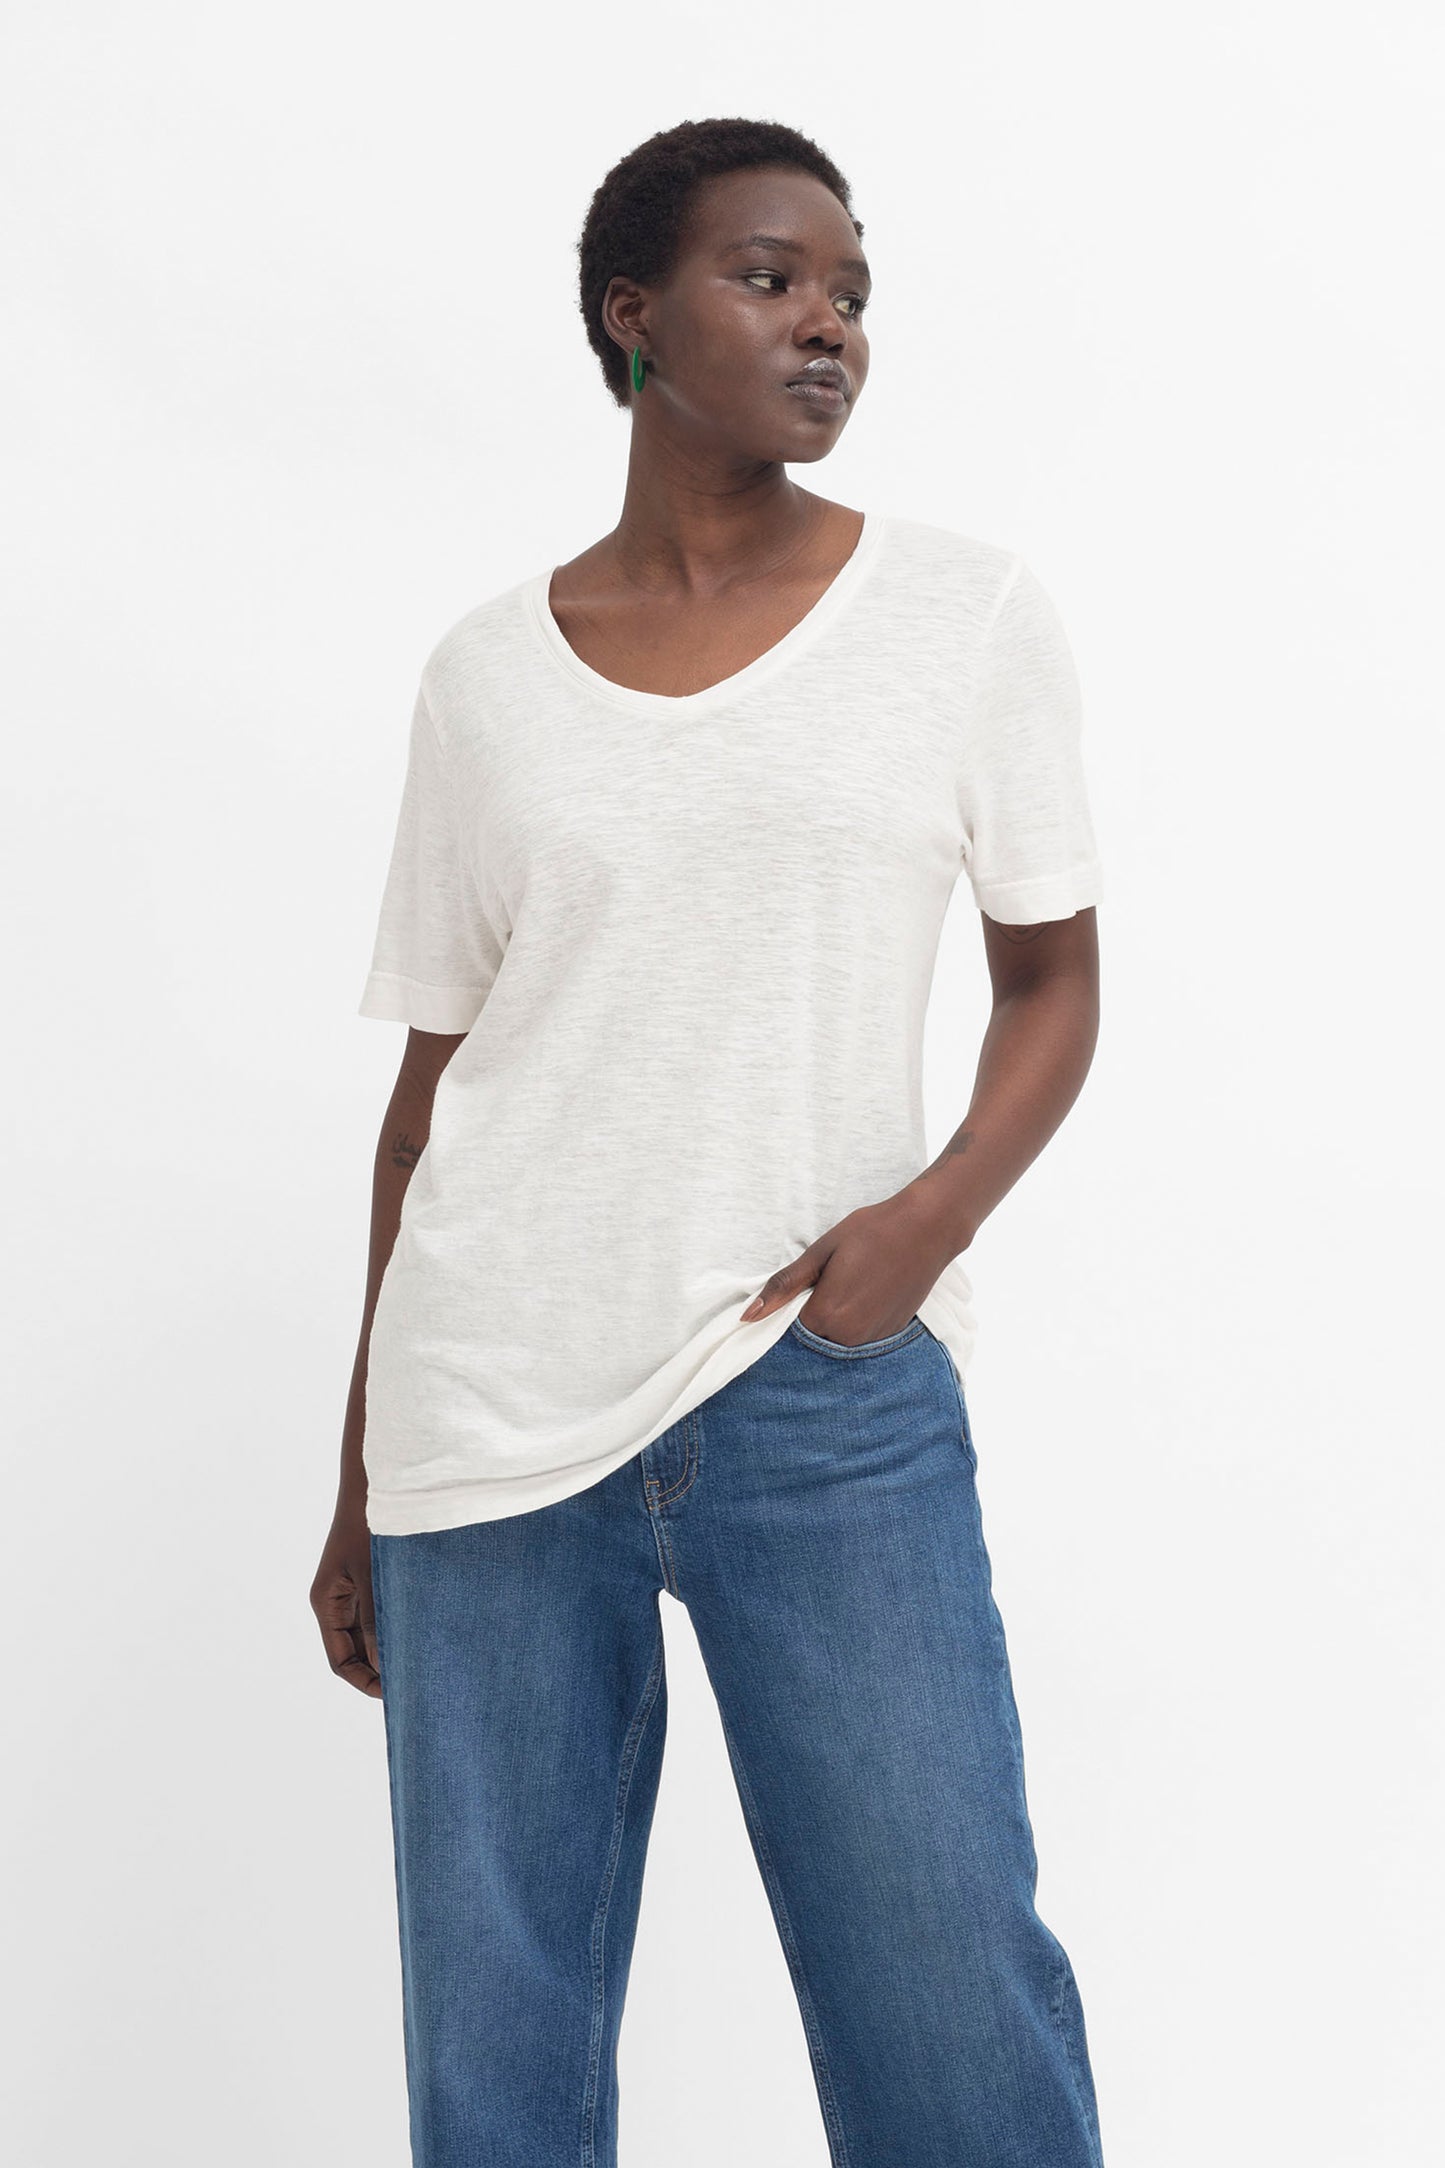 Rannell Hemp & Cotton V-Neck Tee Model Front untucked | OPTIC WHITE